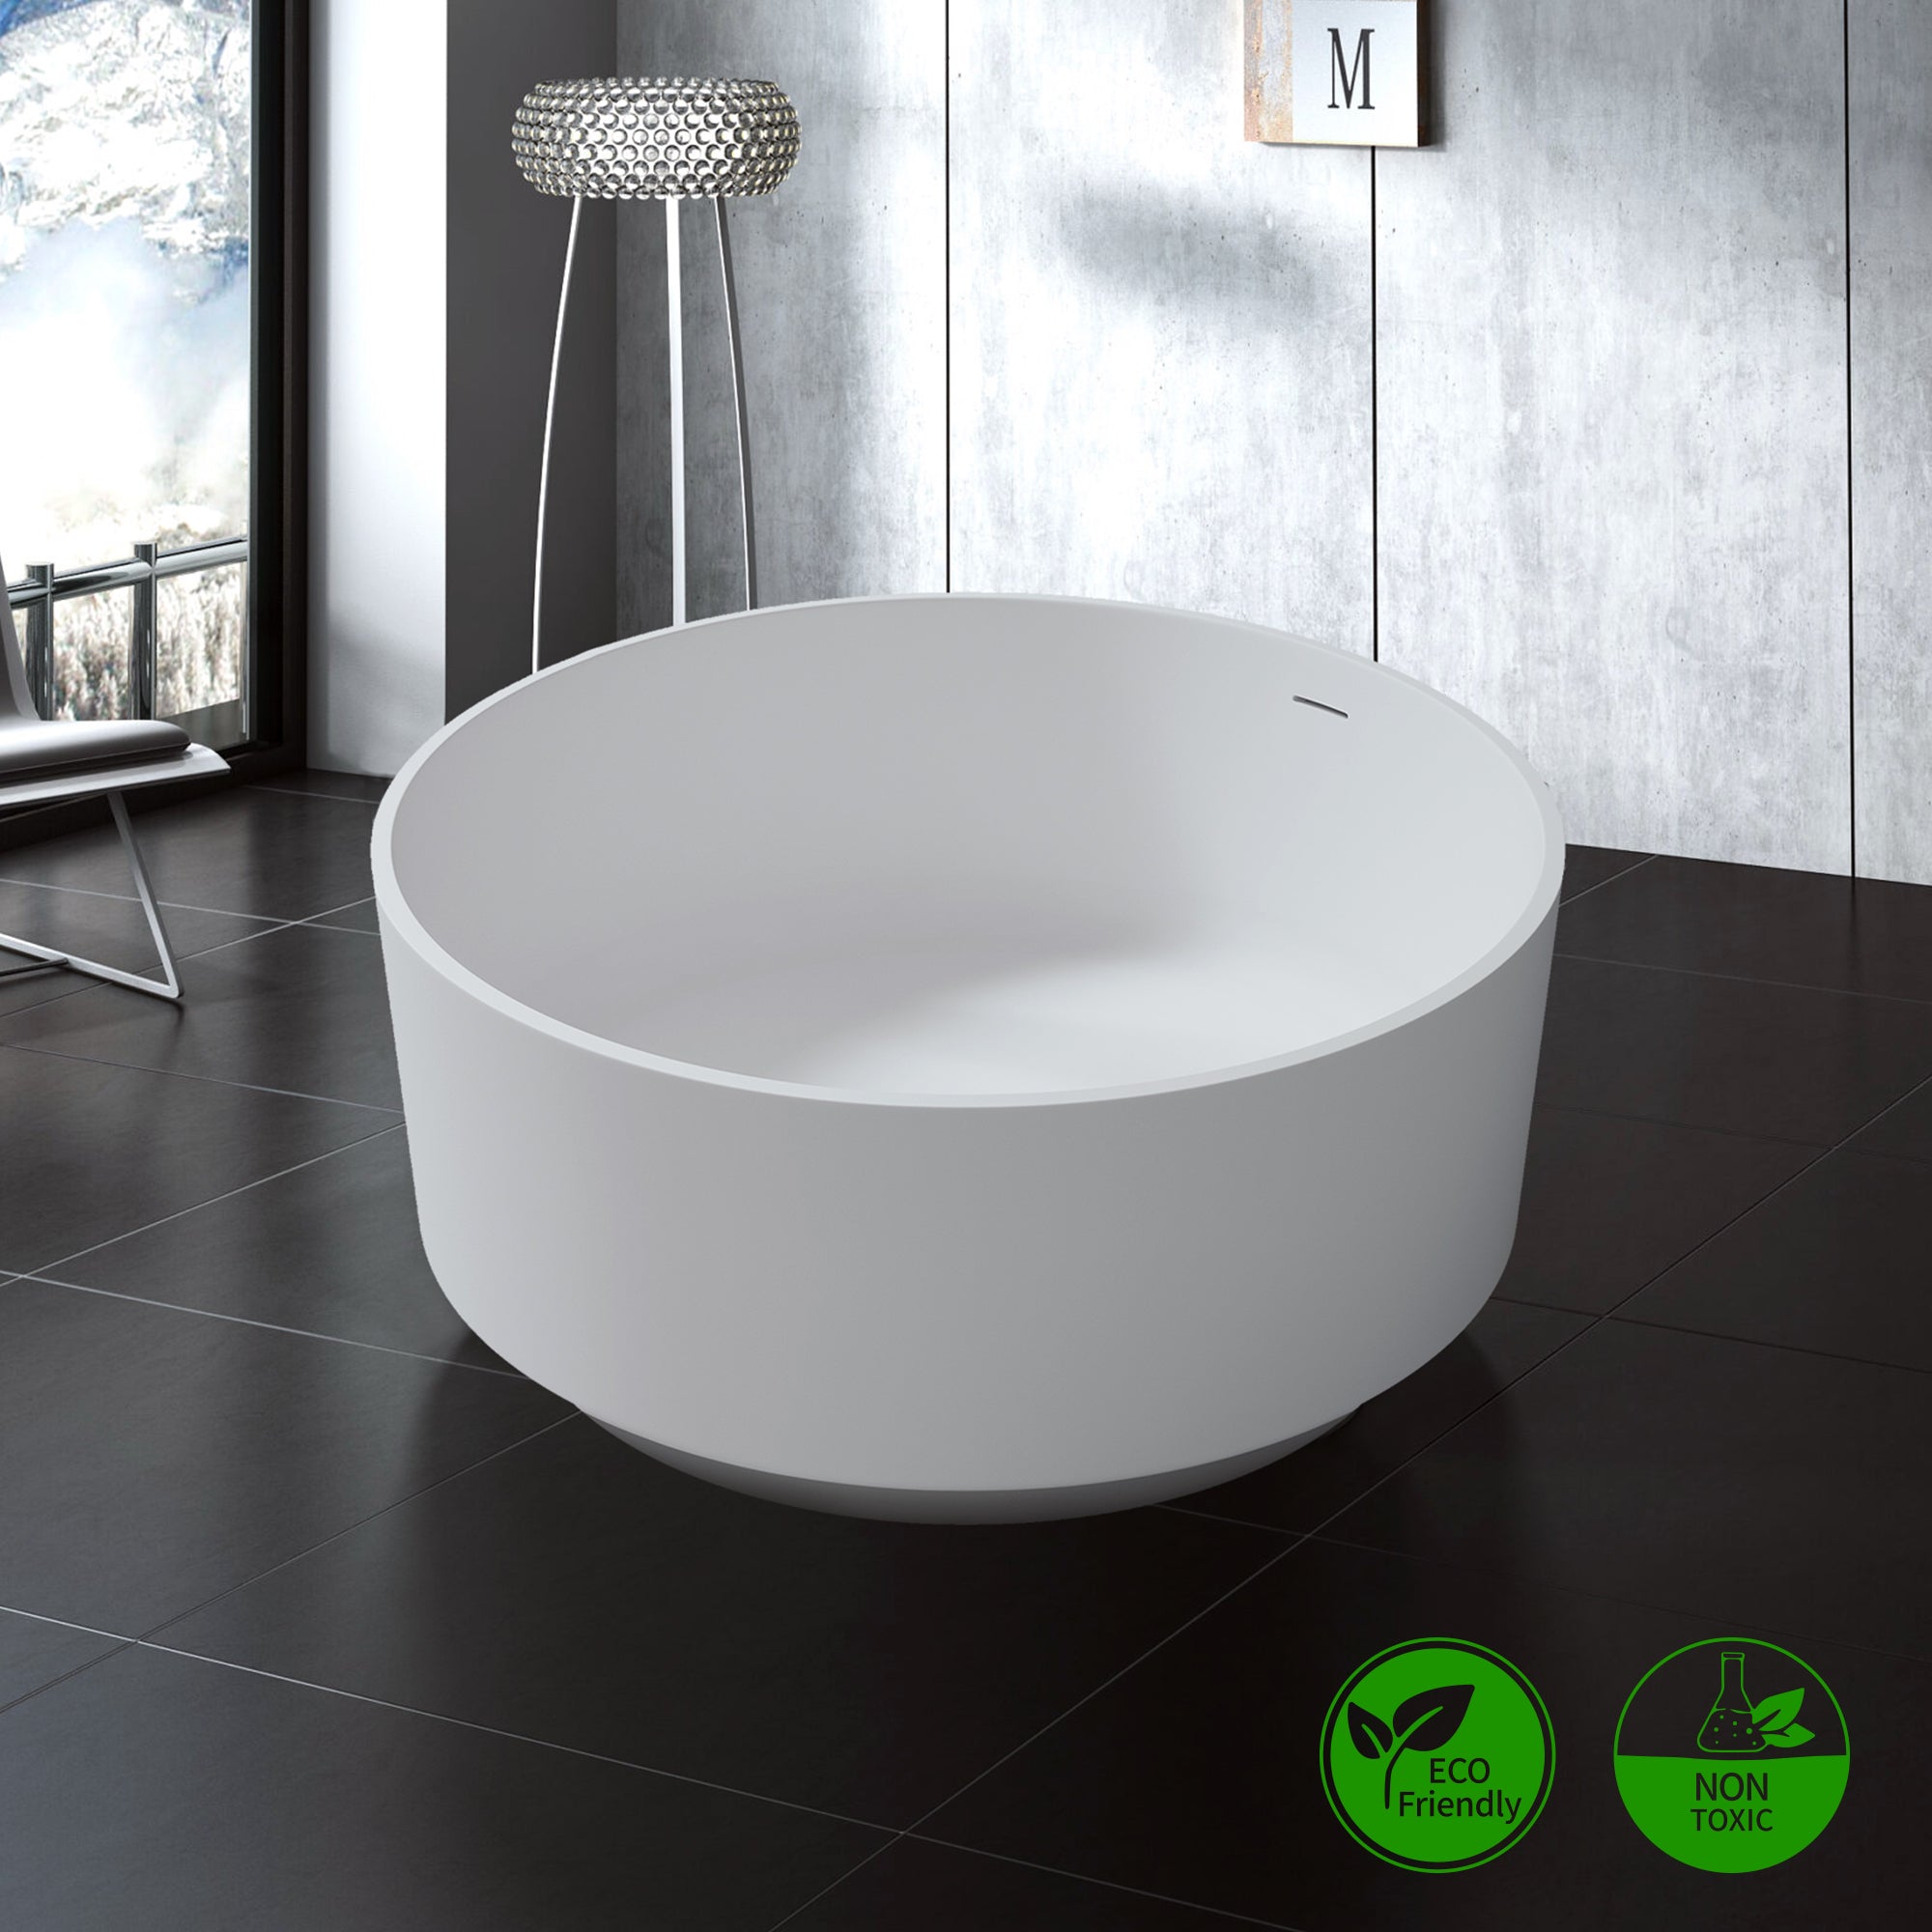 49" Oval Shaped Freestanding Solid Surface Soaking Bathtub with Overflow RX-S11-49